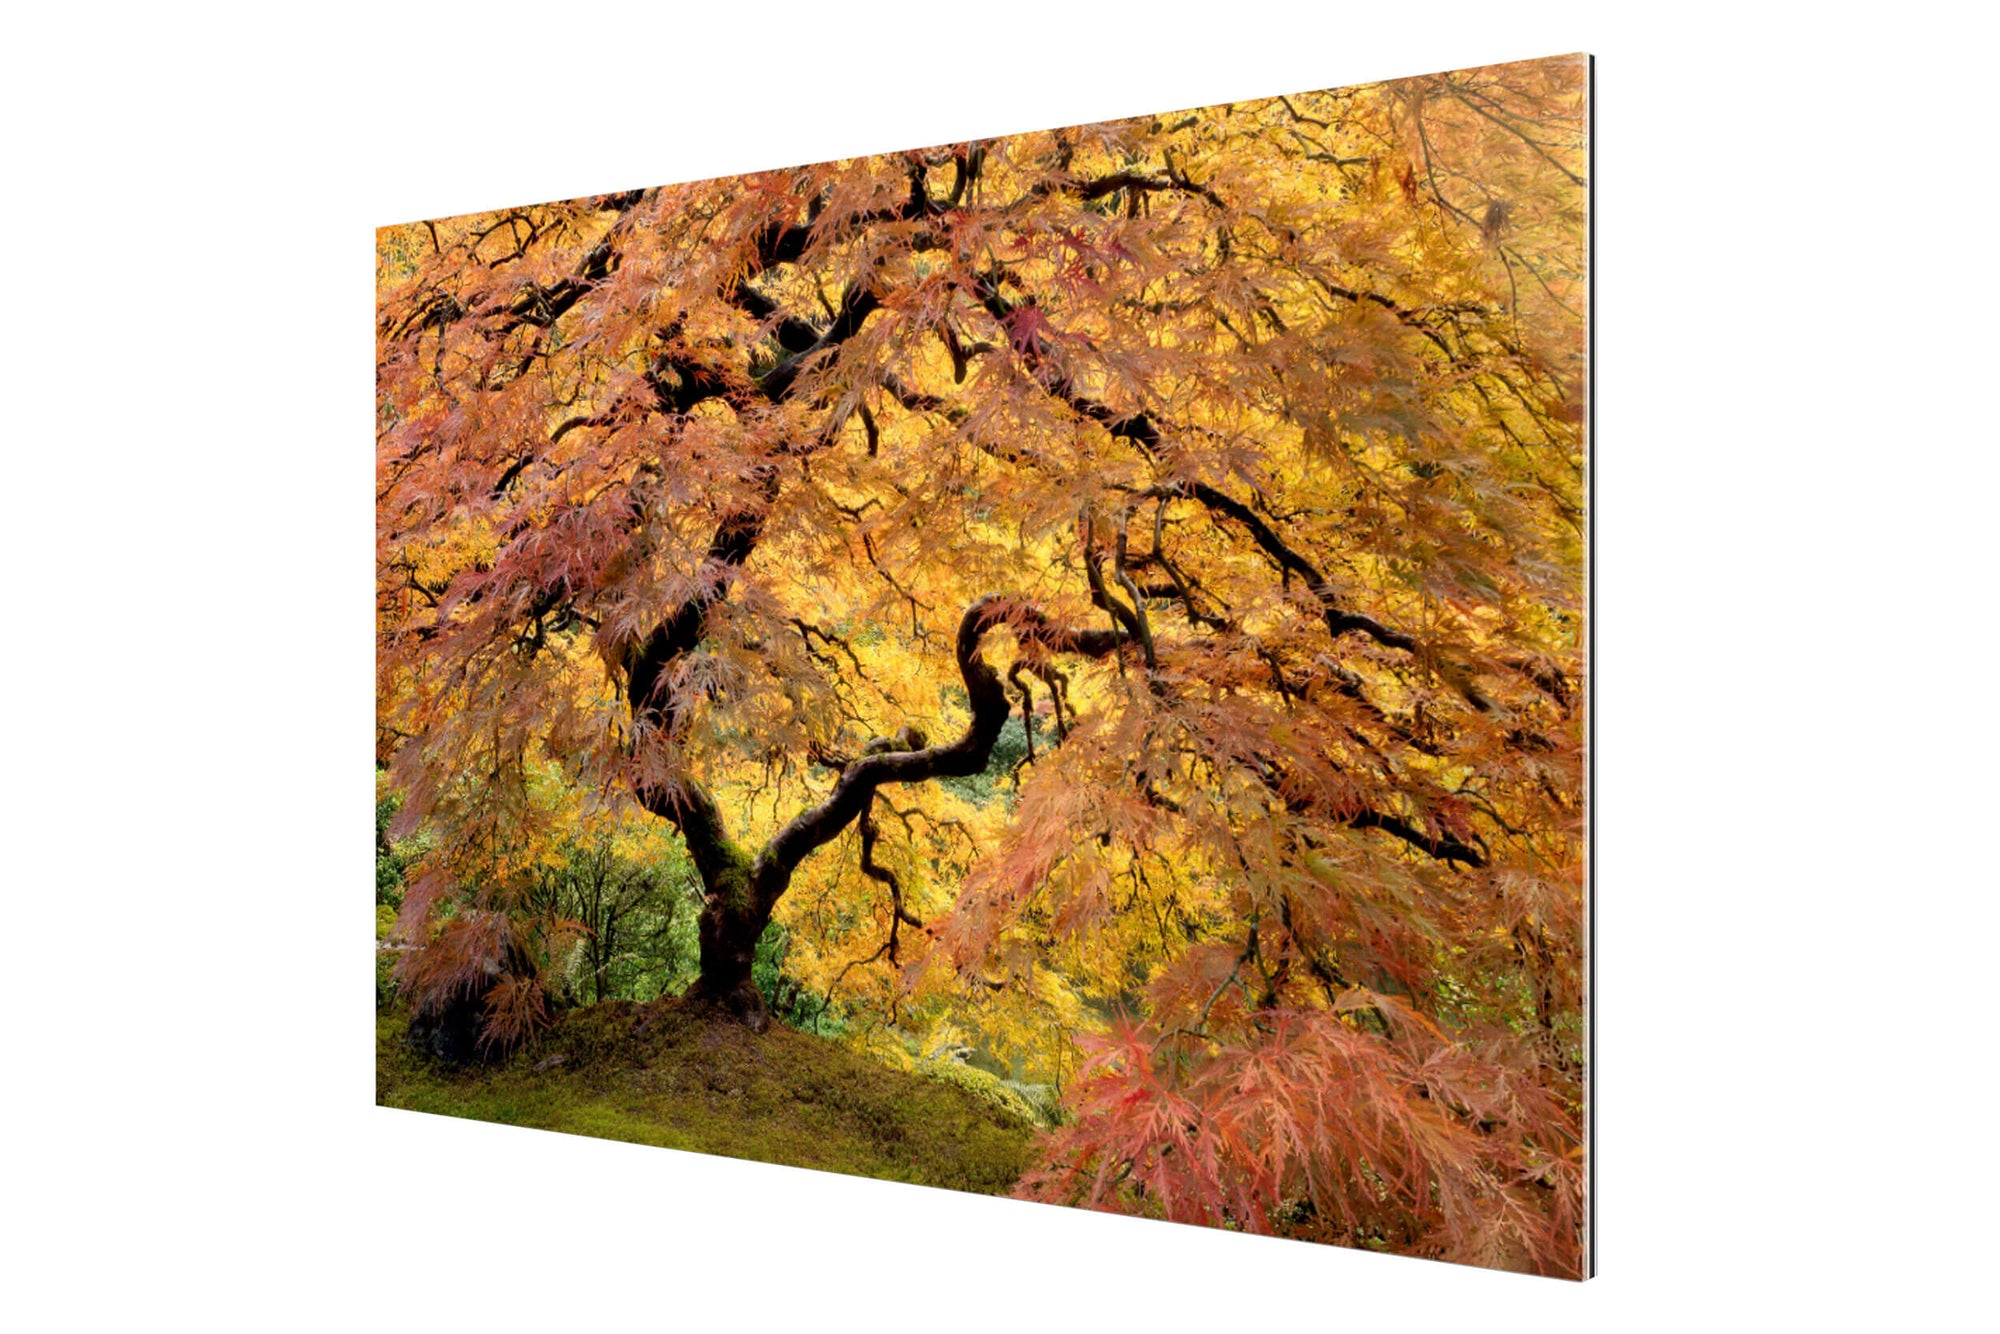 A piece of TruLife acrylic Japanese Garden art shows the famous maple tree in Portland.